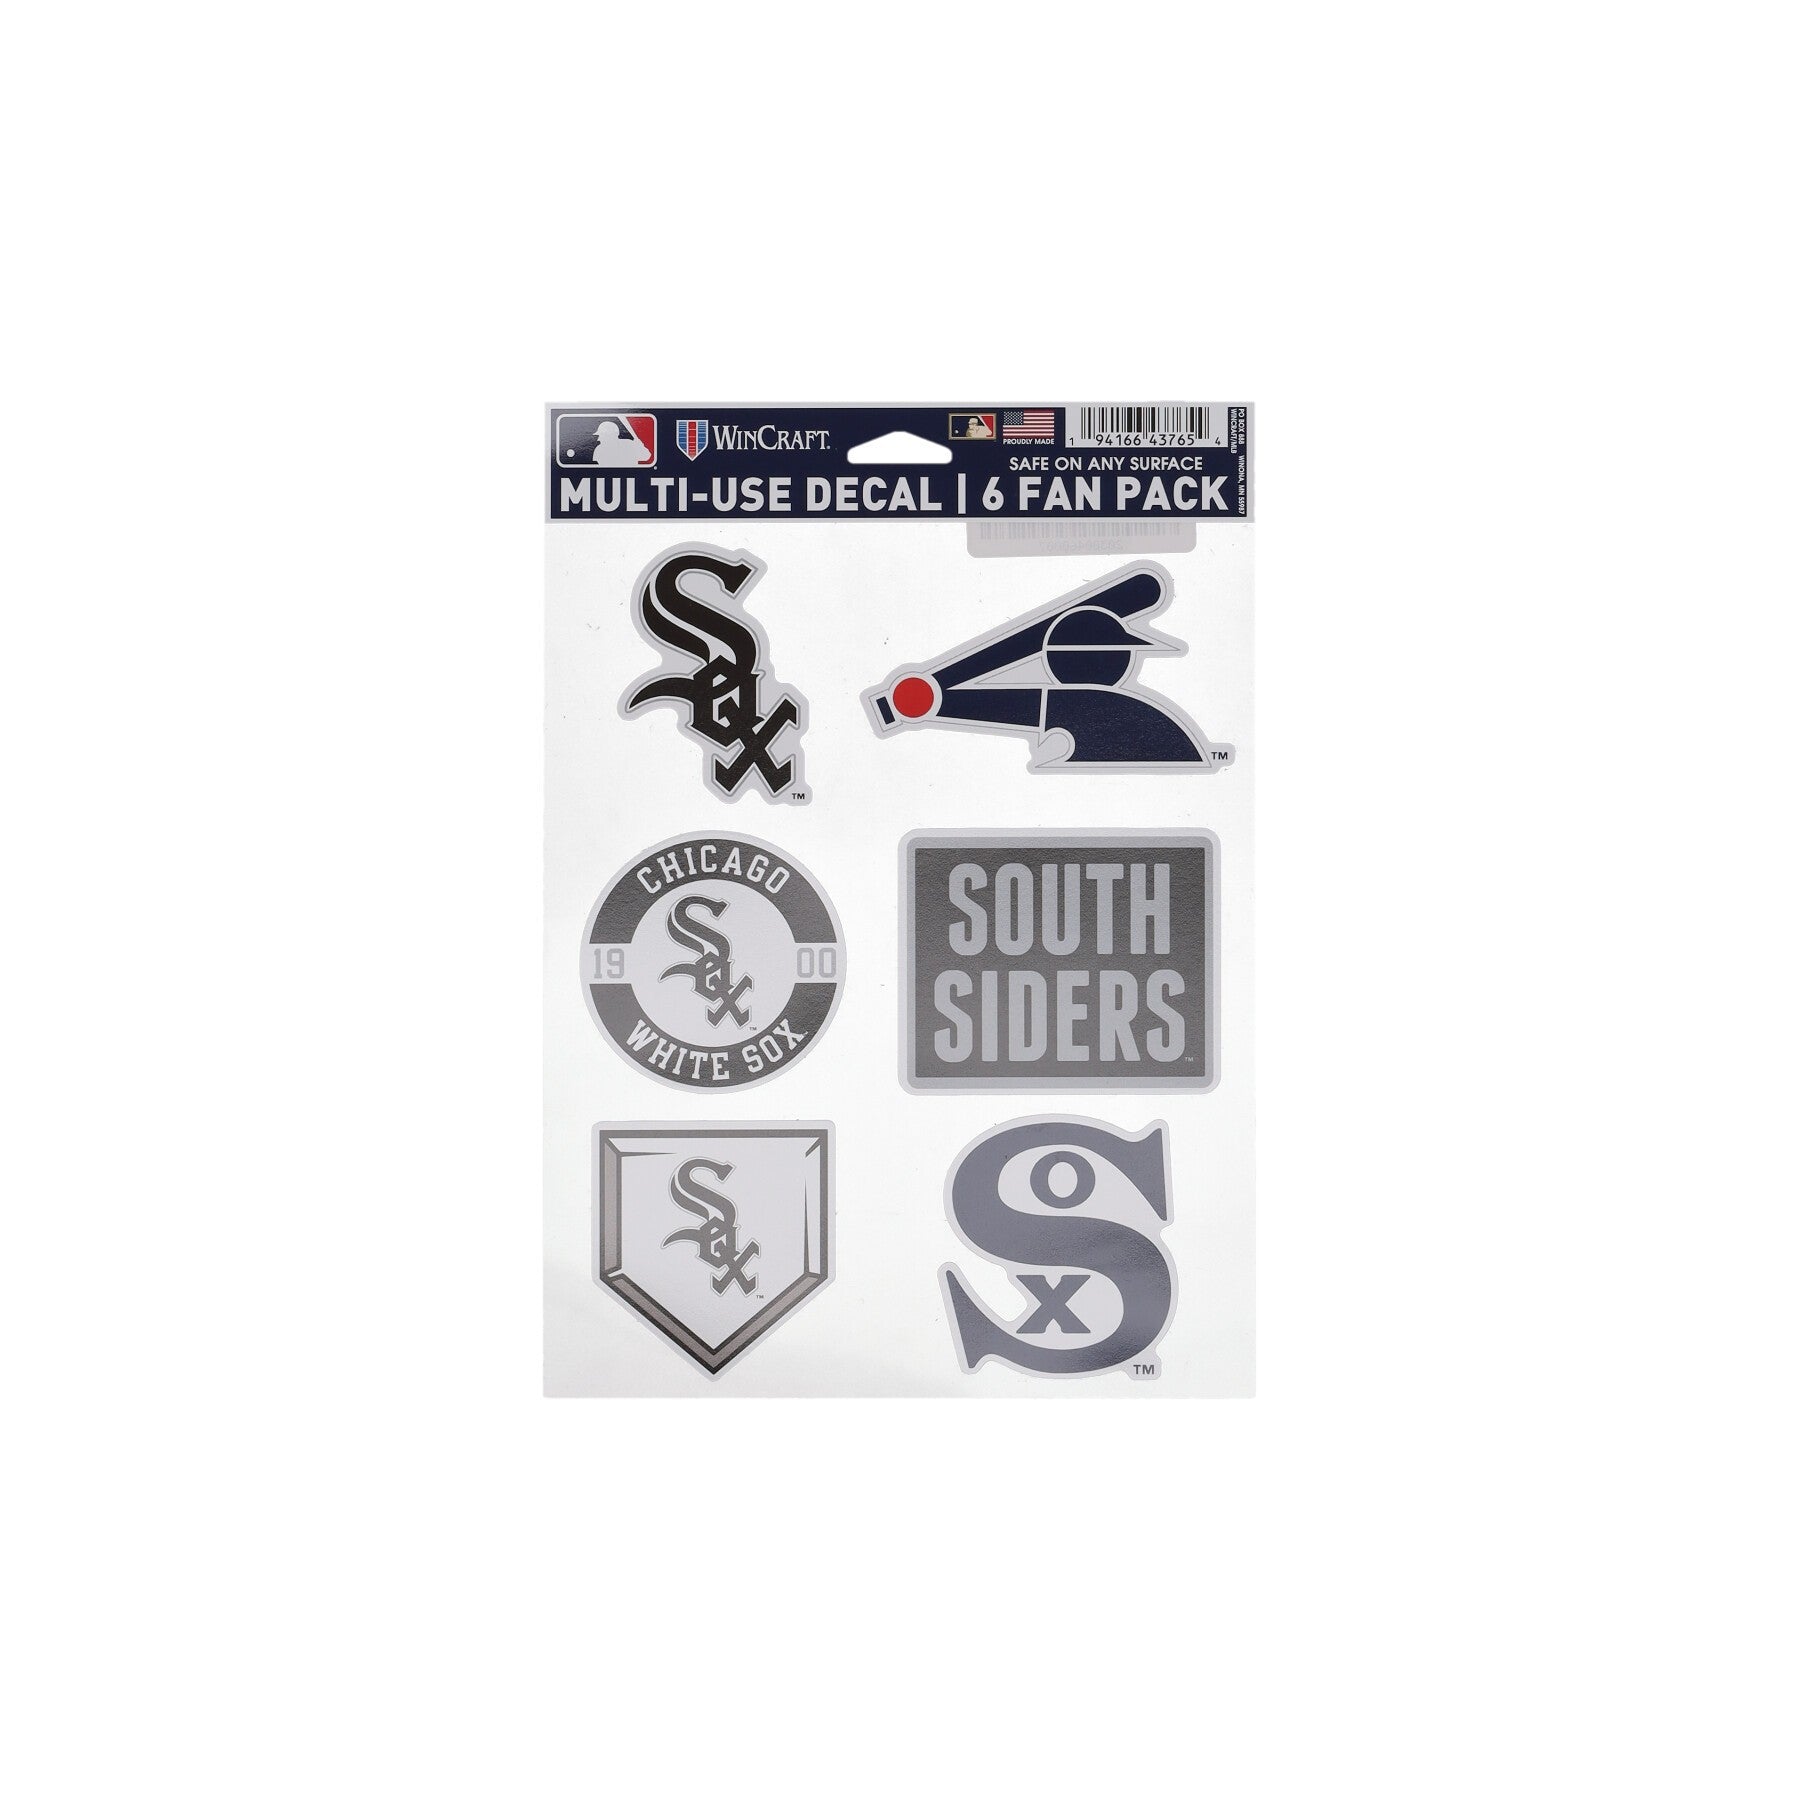 Wincraft, Decalcomania Unisex Mlb 5.5 X 7.75” Fan Pack Decals  Chiwhi, Original Team Colors